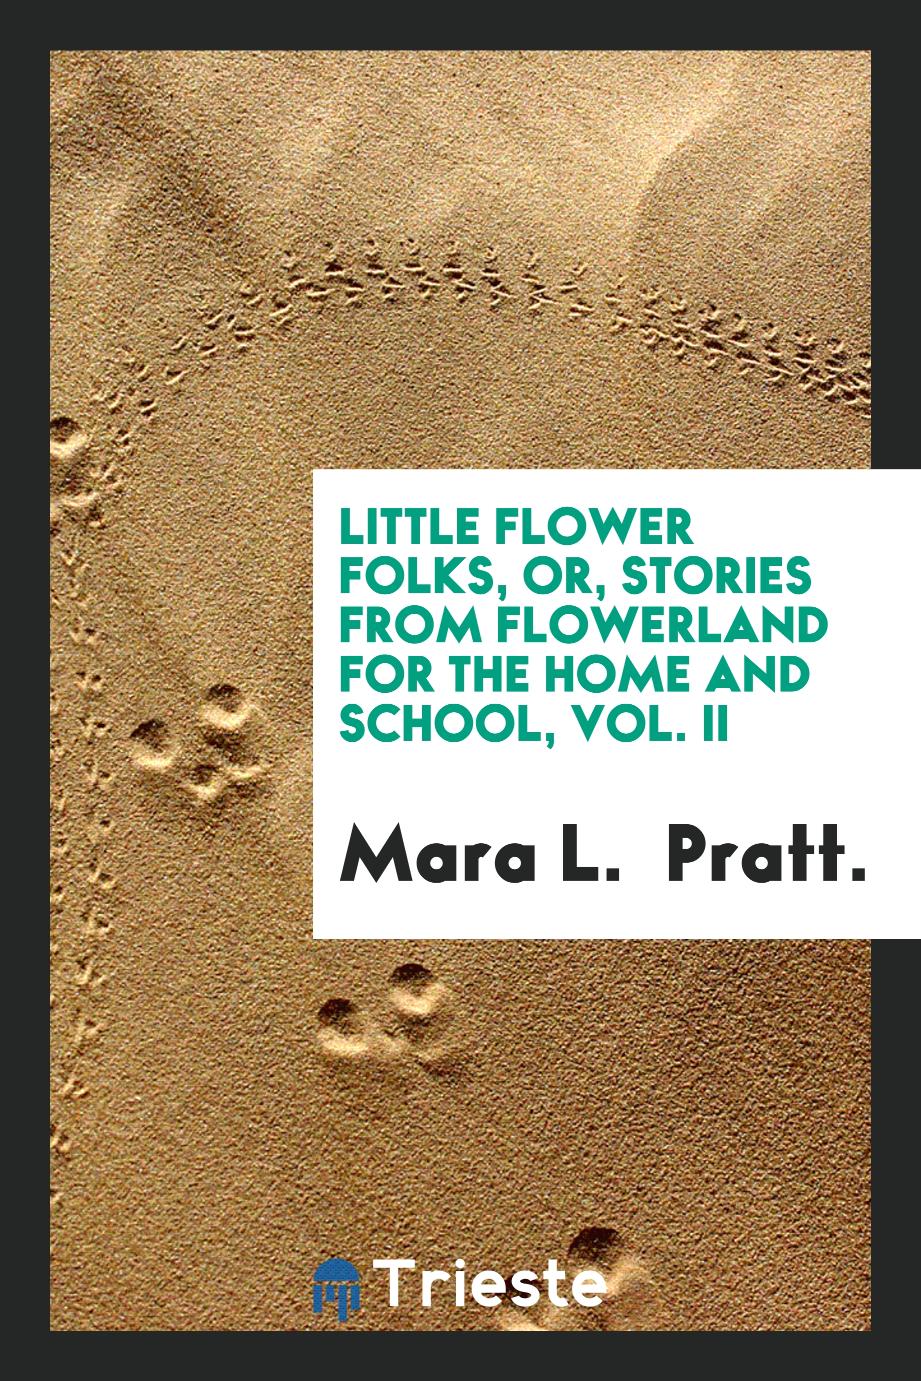 Little Flower Folks, or, Stories from Flowerland for the Home and School, Vol. II